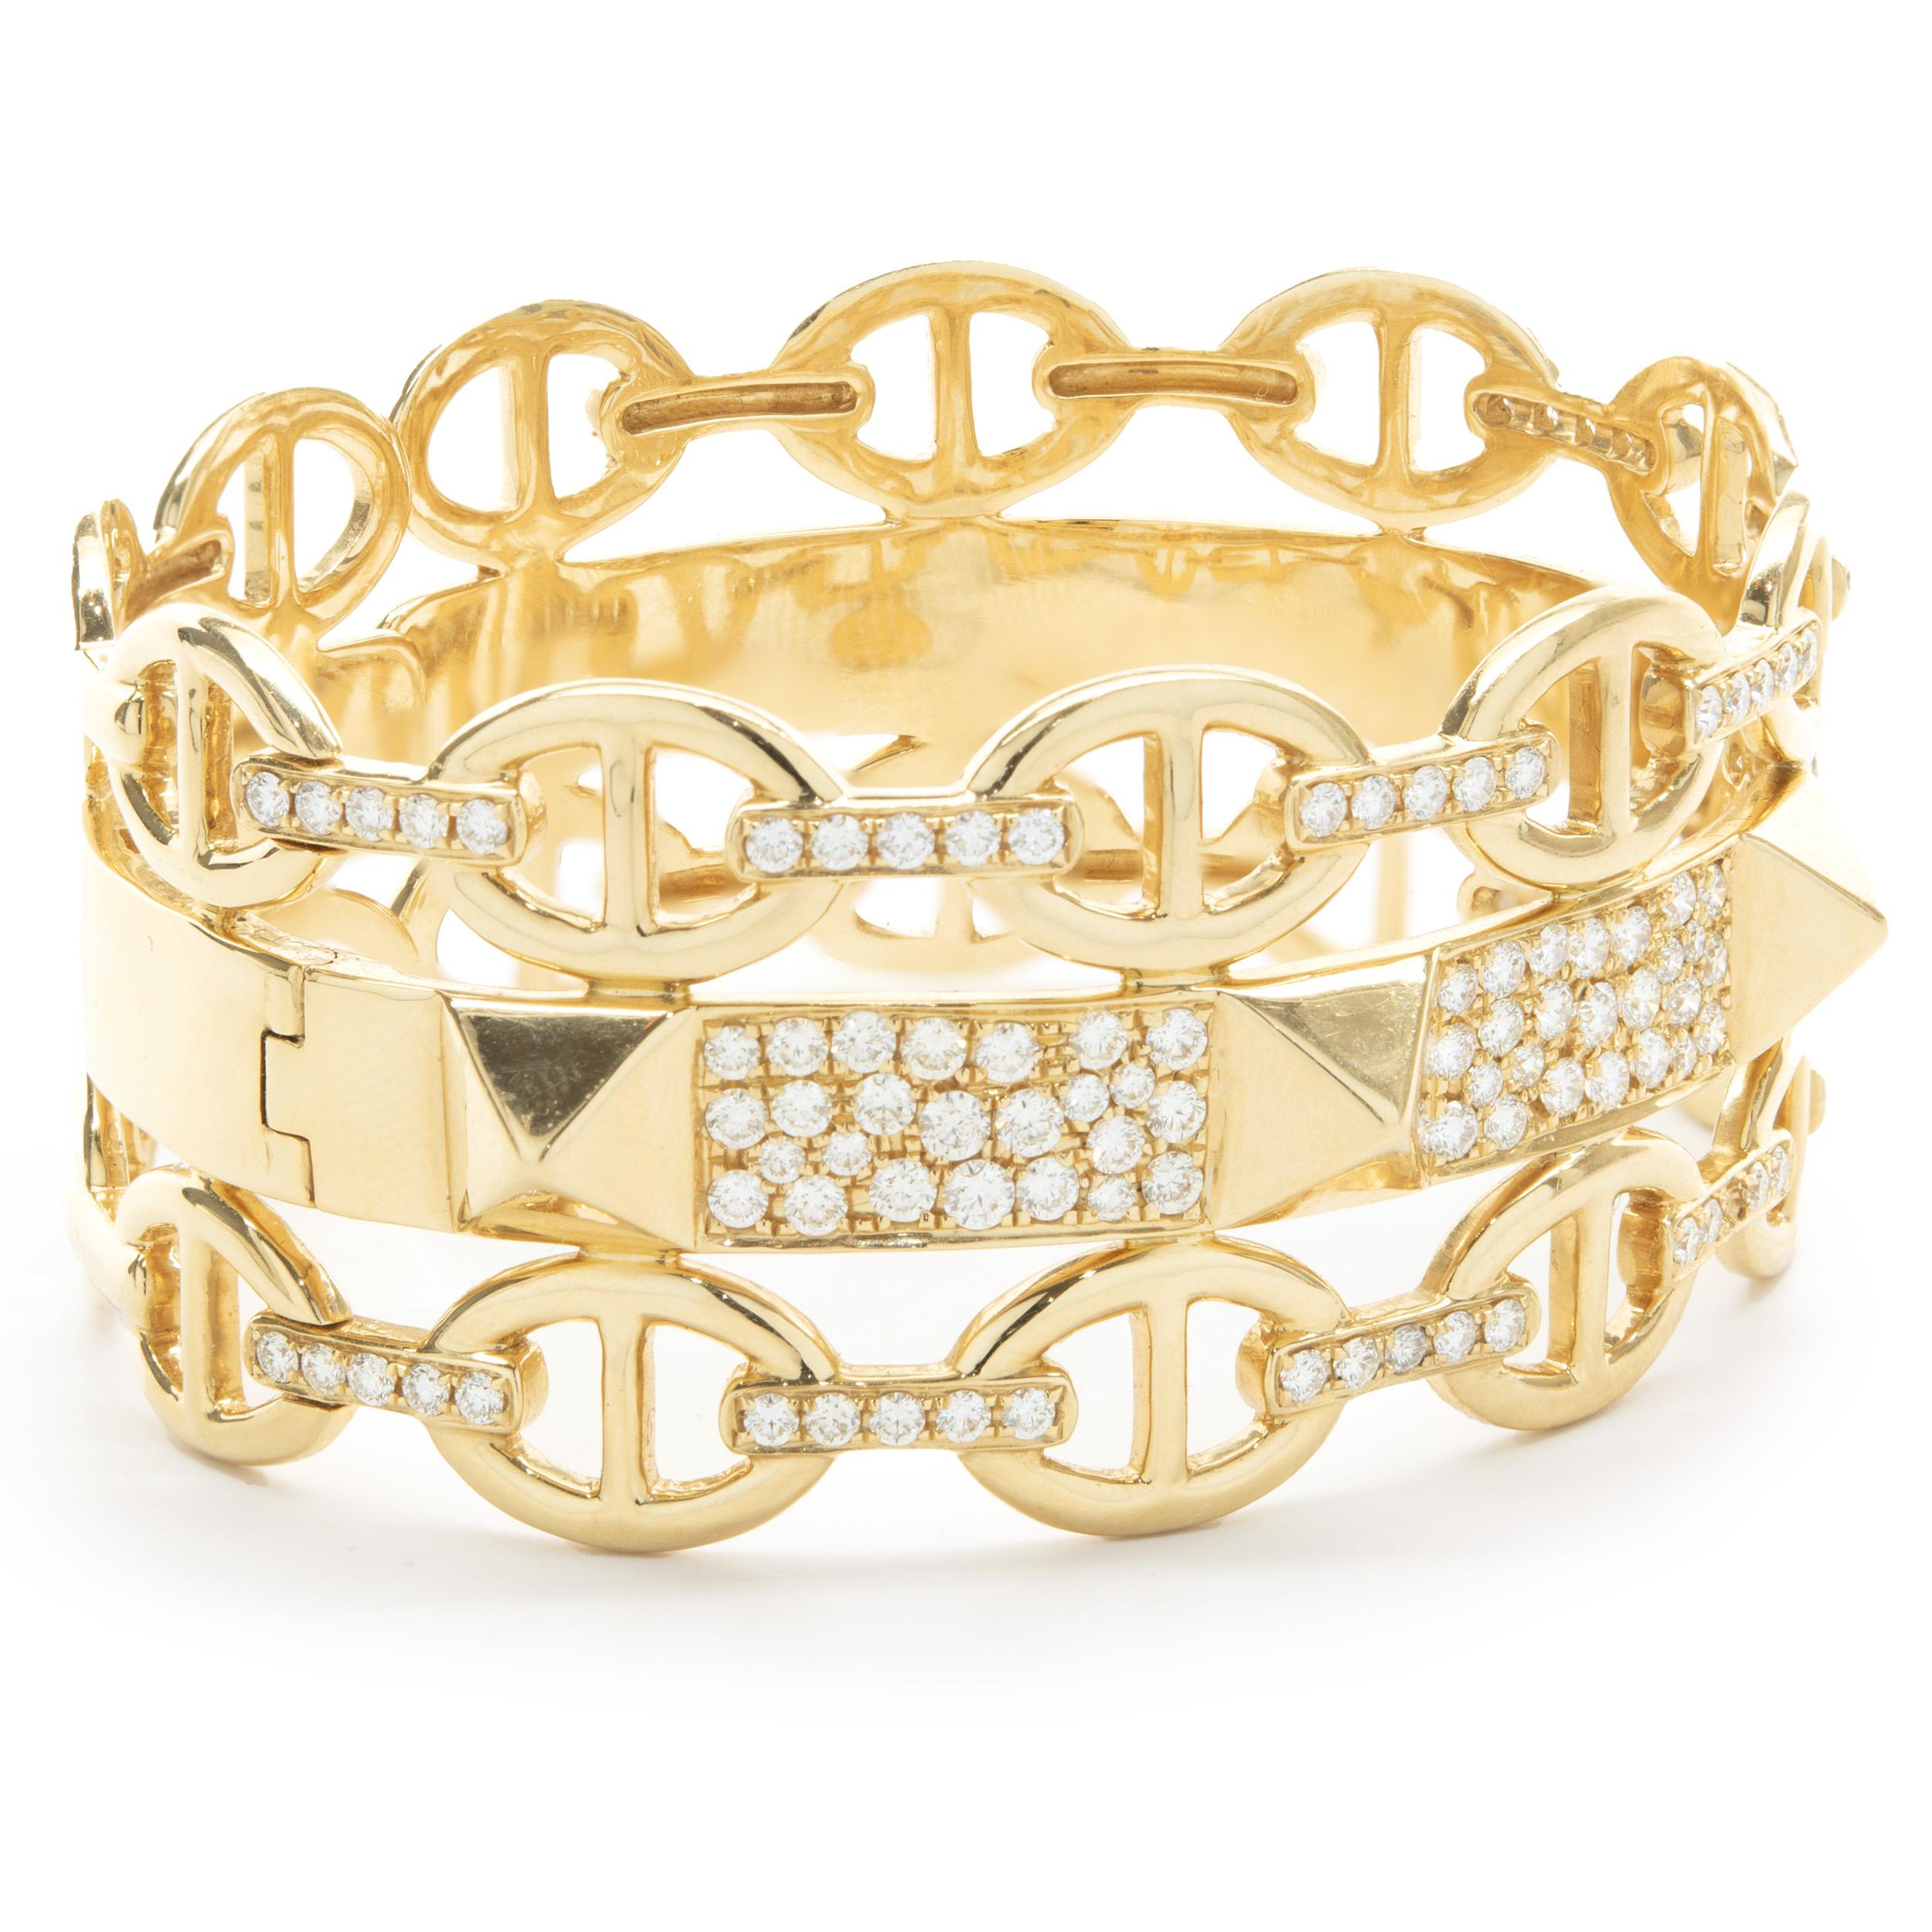 Material: 18K yellow gold
Diamonds: 135 round cut = 2.38cttw
Color: G
Clarity: VS
Dimensions: bracelet will fit up to a 7.5-inch wrist
Weight: 50.02 grams